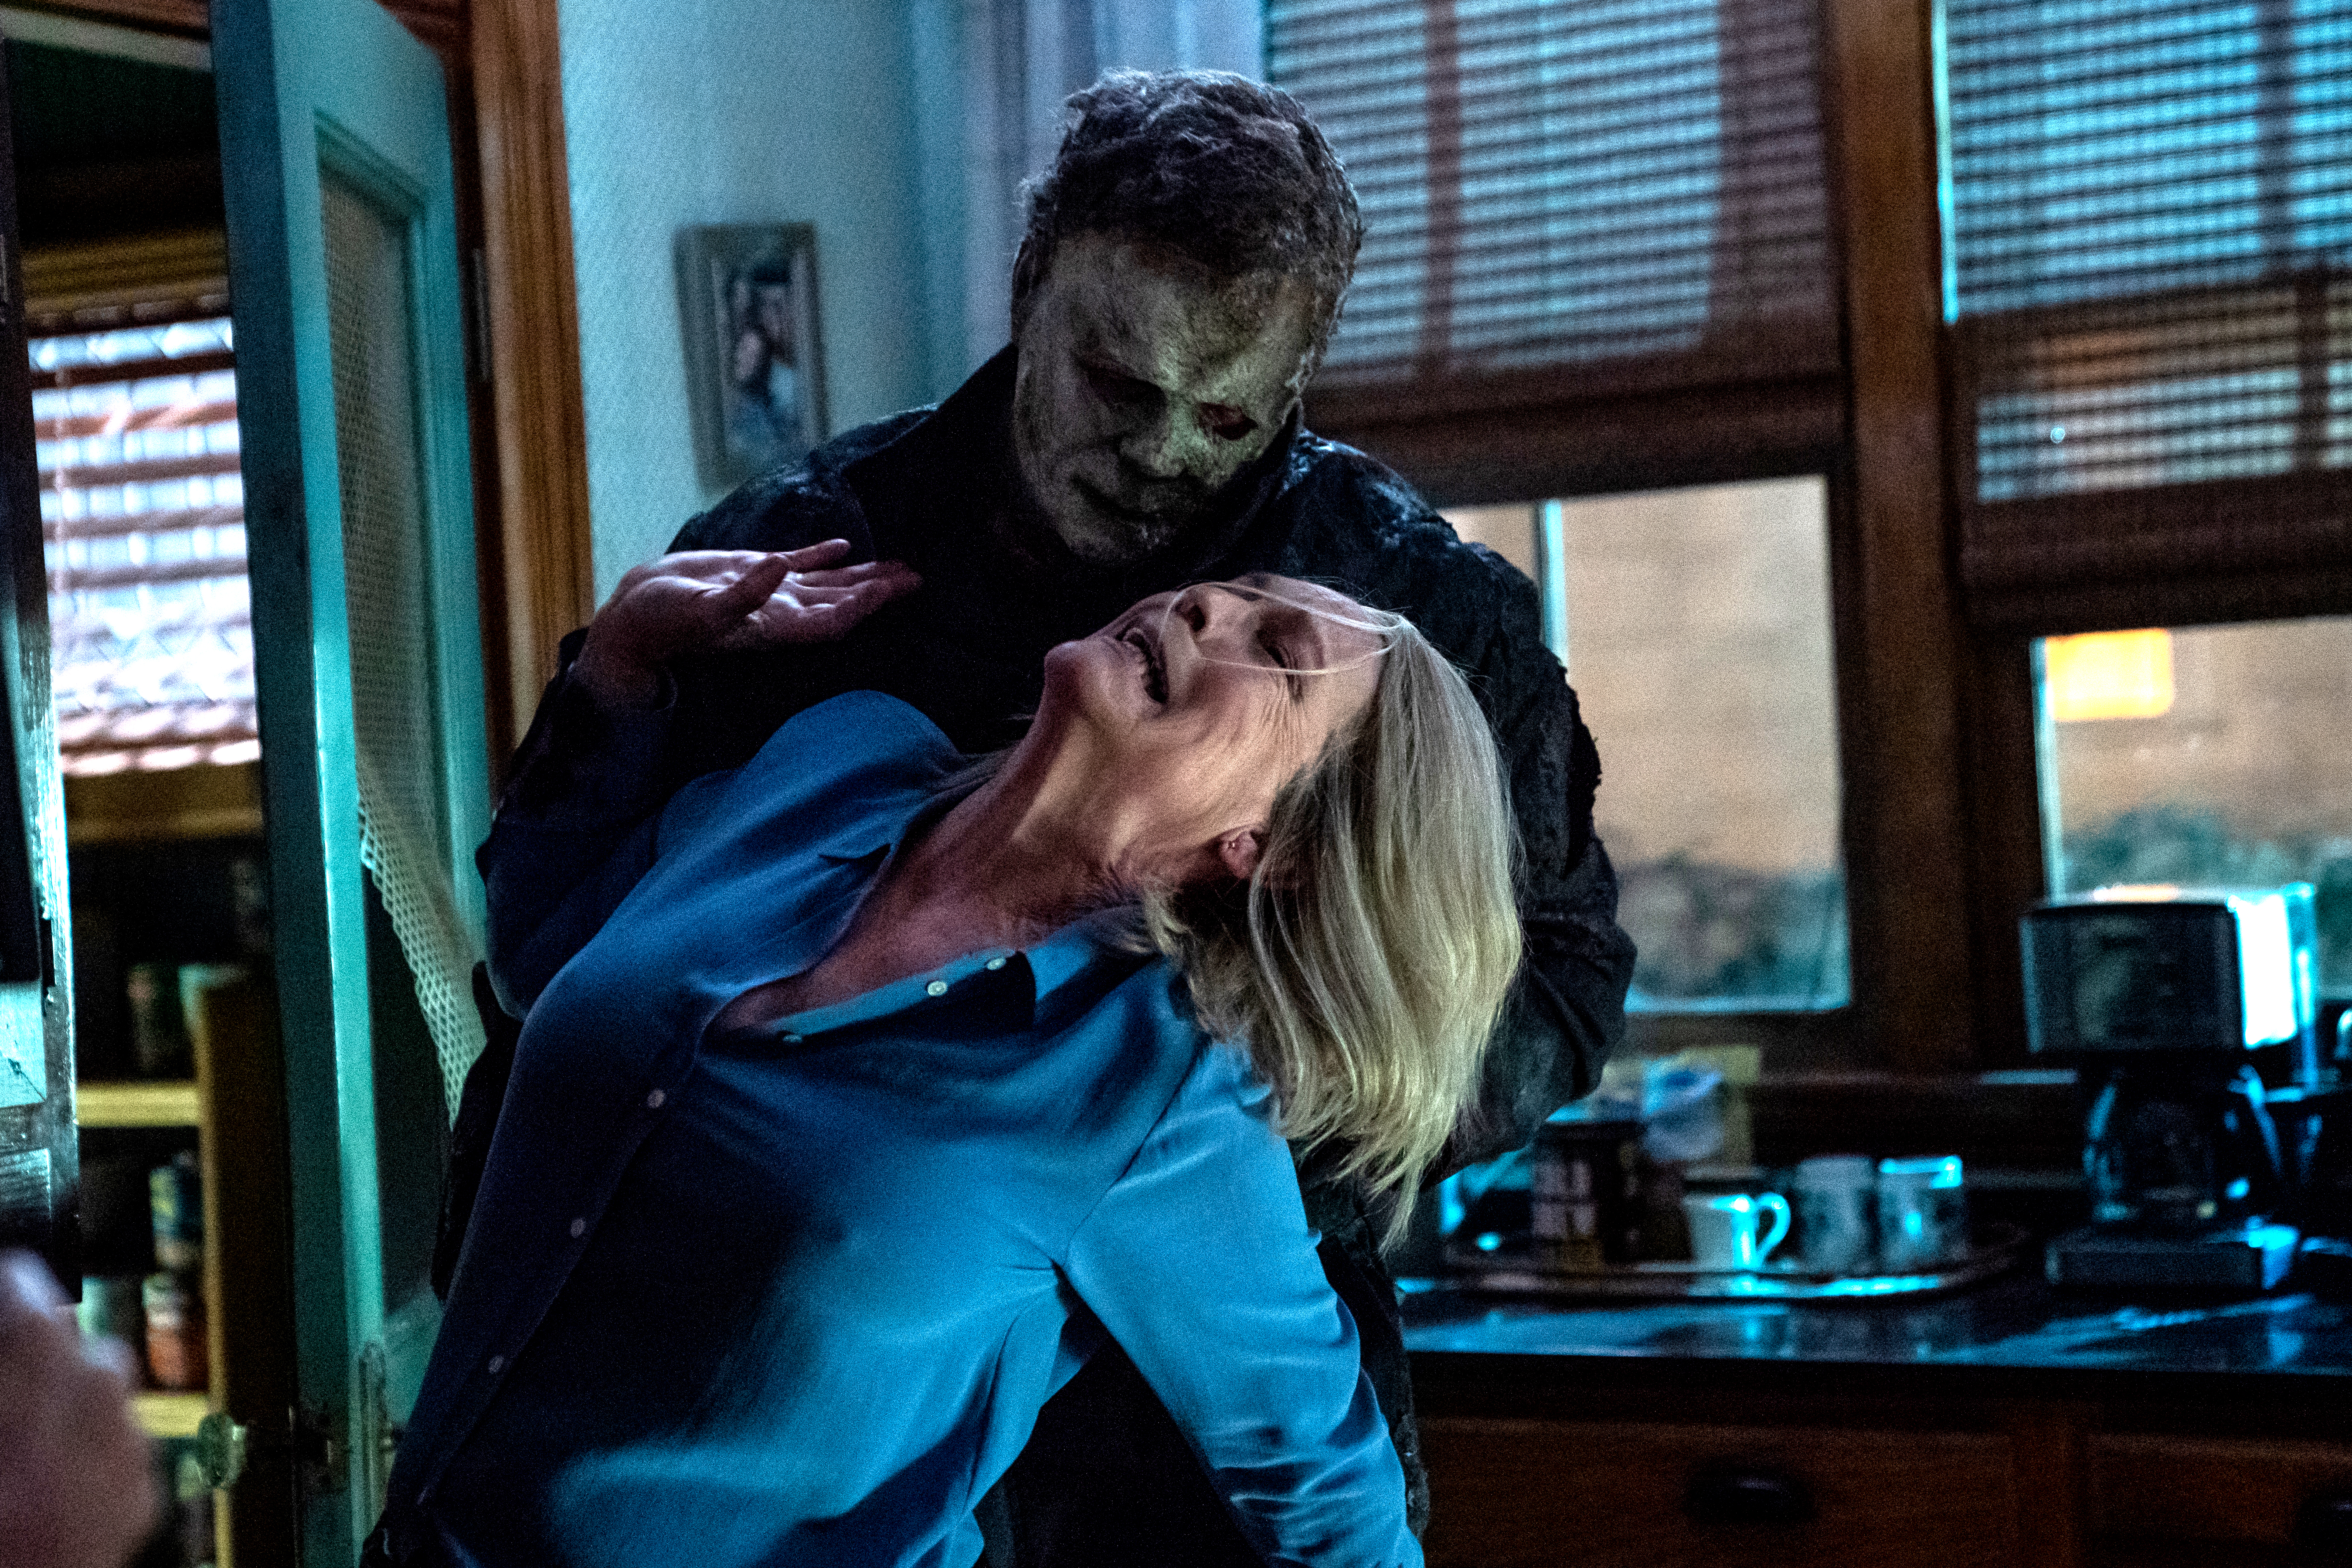 Bathed in blue light, Michael Myers twists Laurie’s arm in the kitchen in Halloween Ends